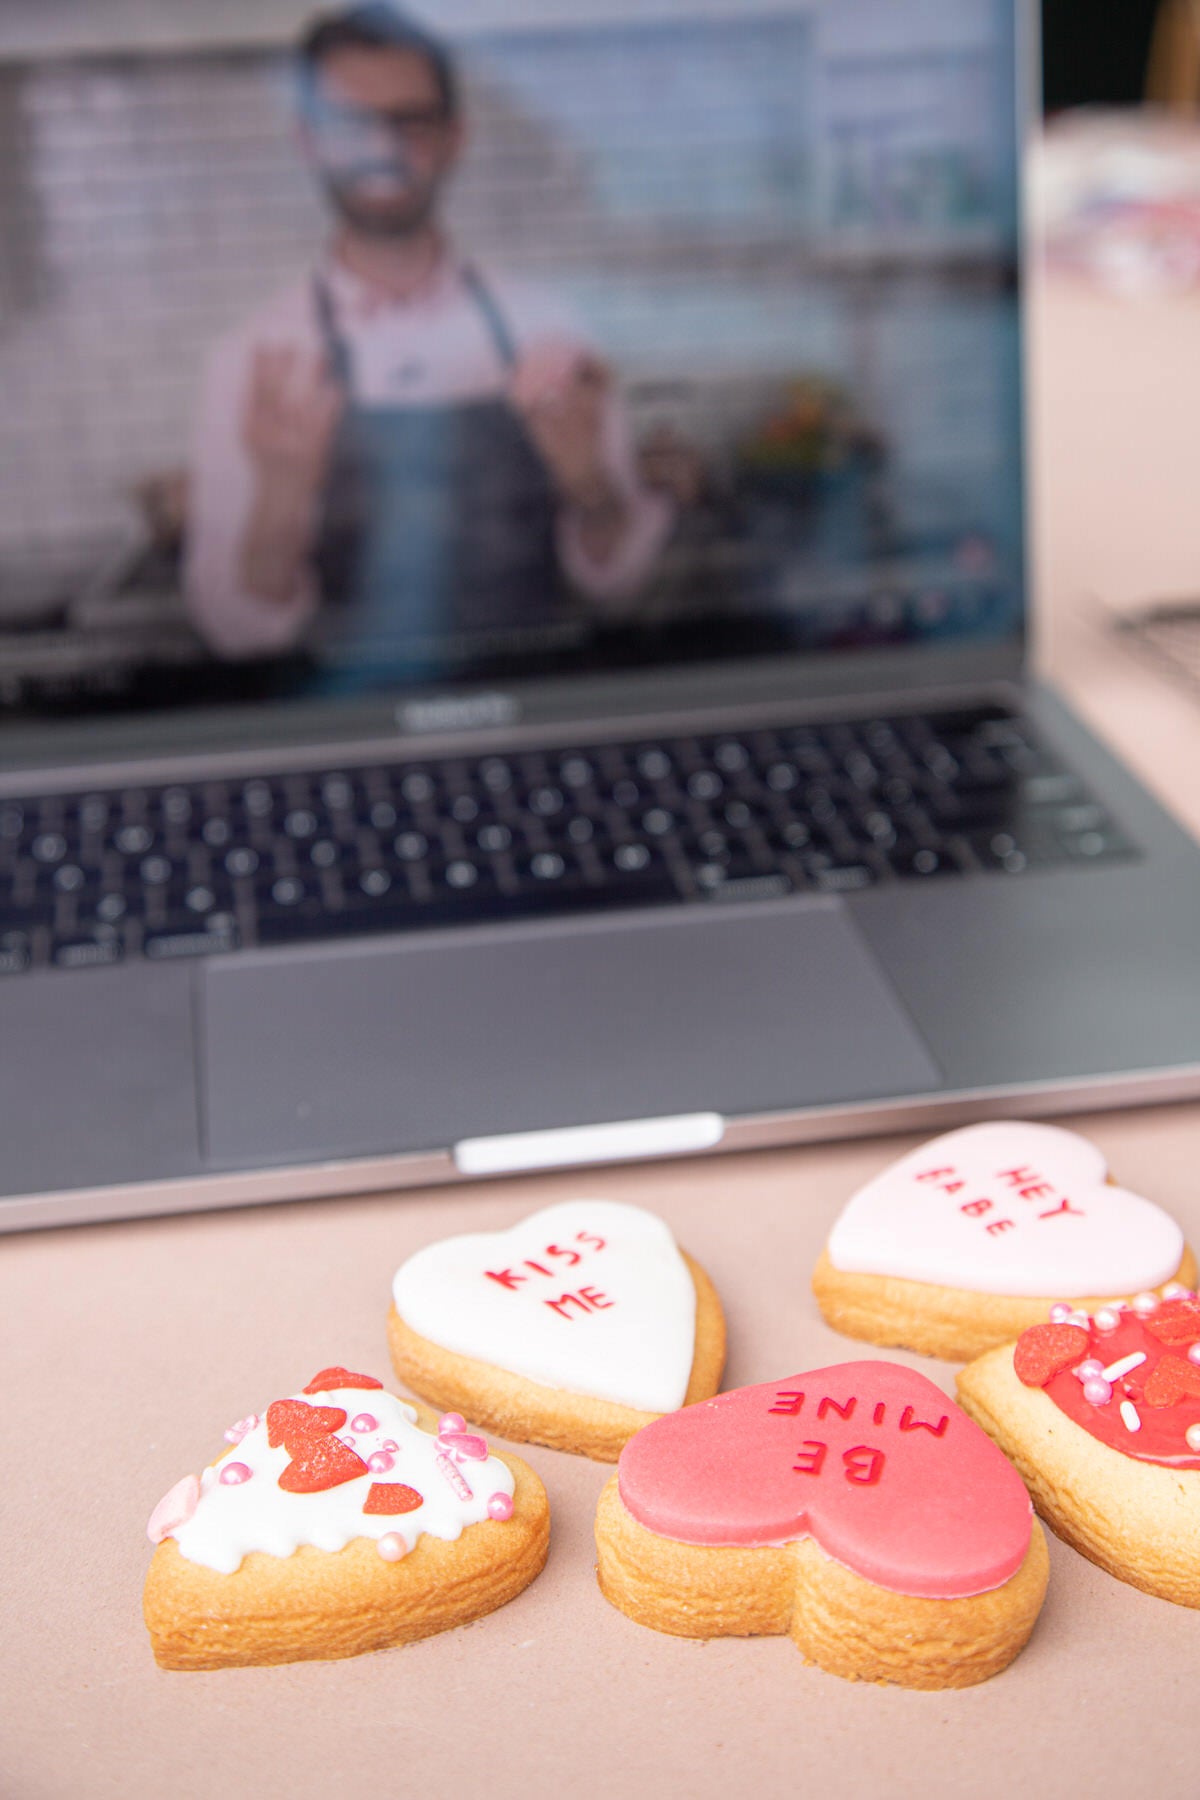 Valentine's Day Cookie Decoration Experience!